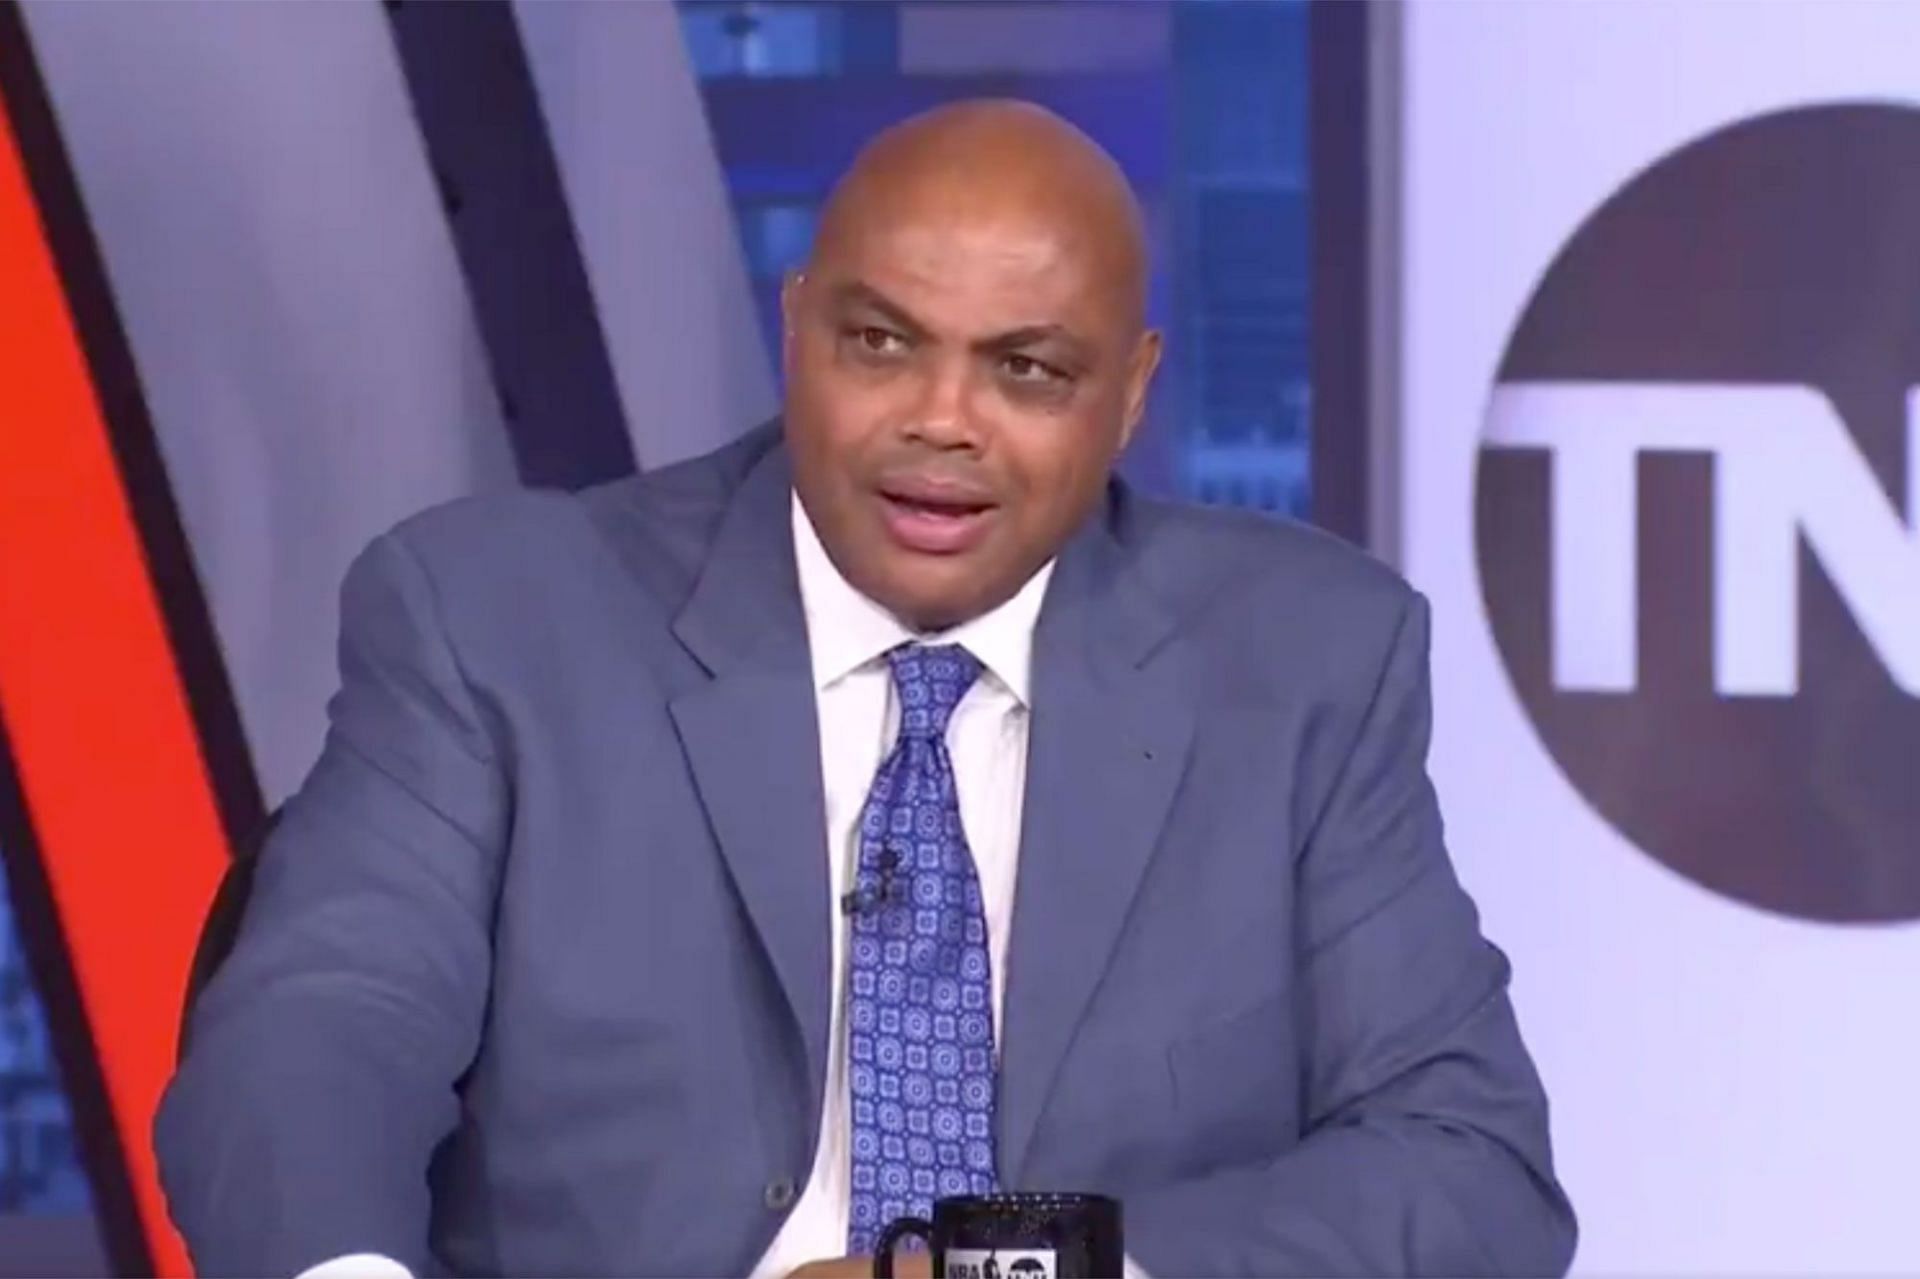 Charles Barkley has an unorthodox and quick fix to fans who go over the line. [Photo: New York Post]